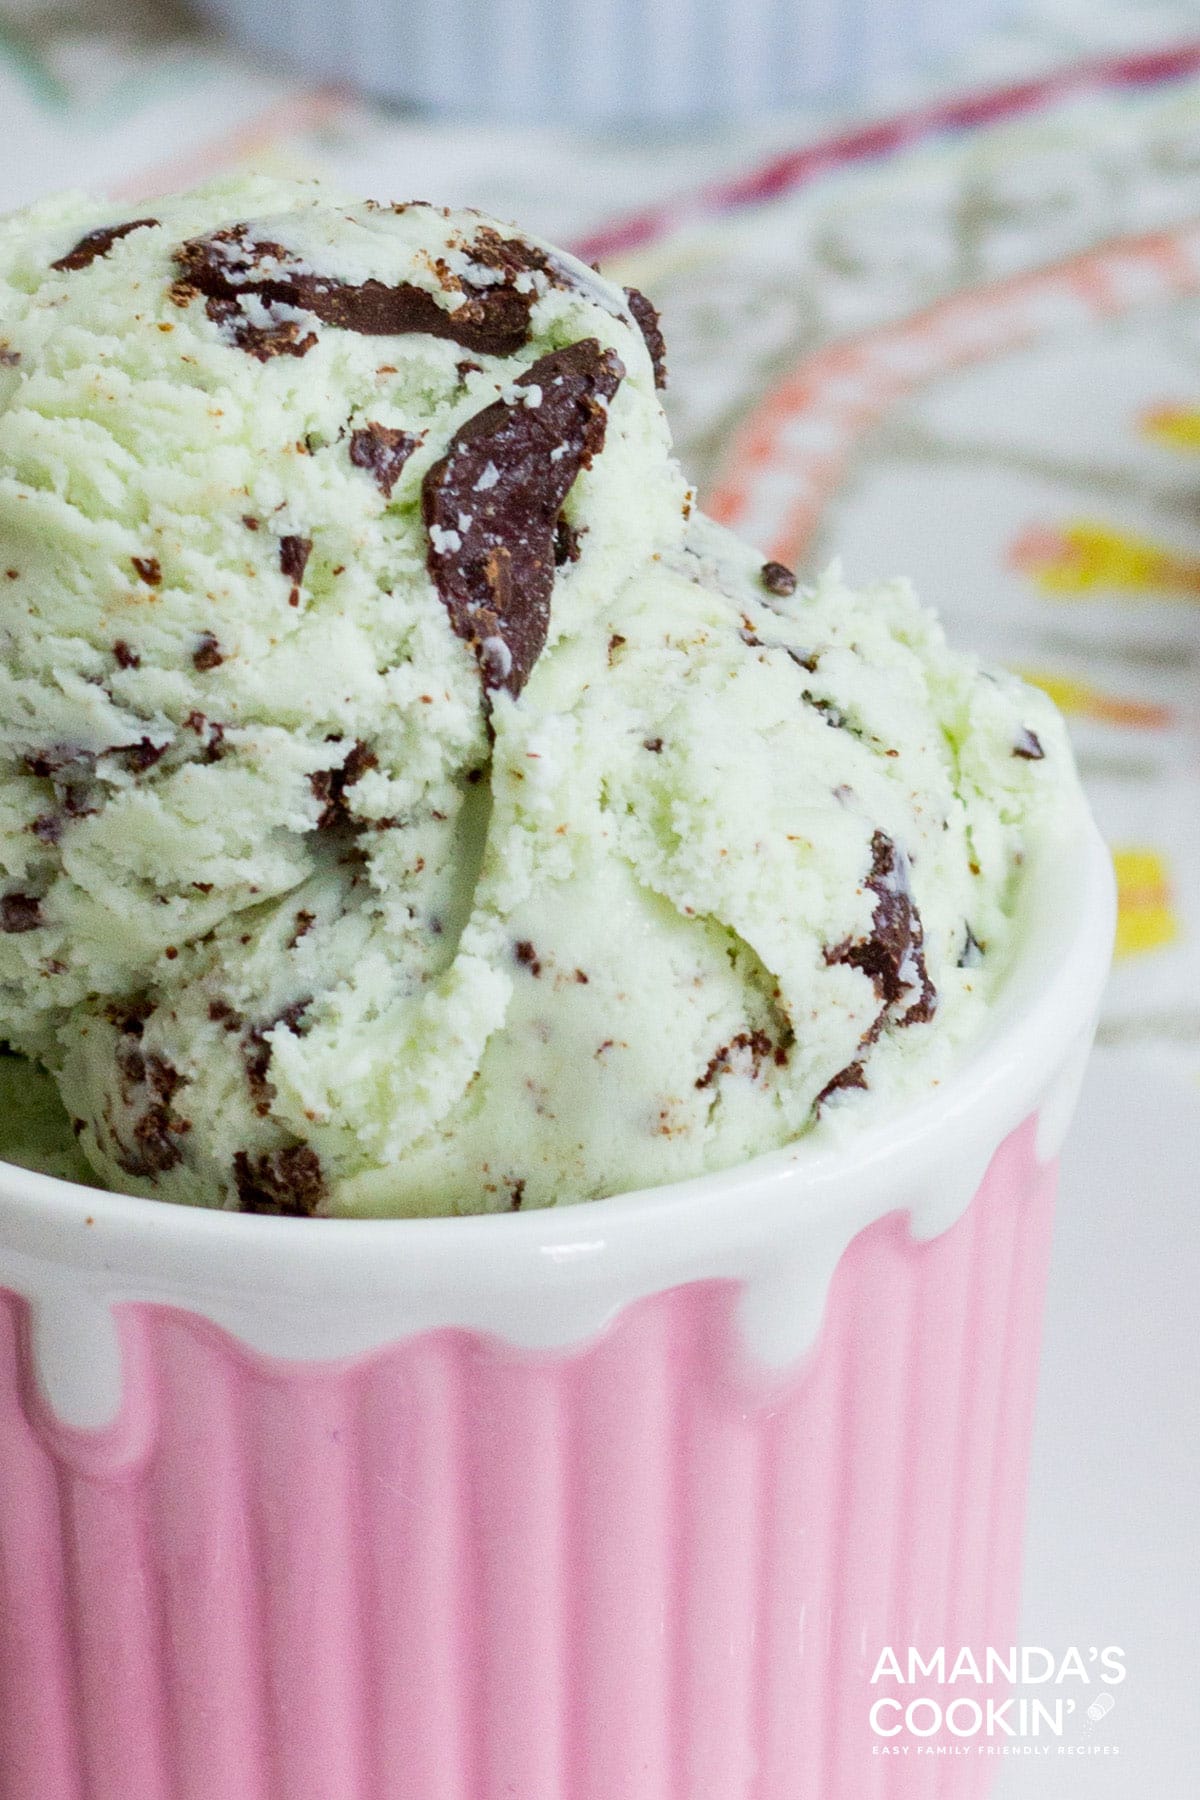 MINT CHOCOLATE CHIP ICE CREAM IN PINK DISH